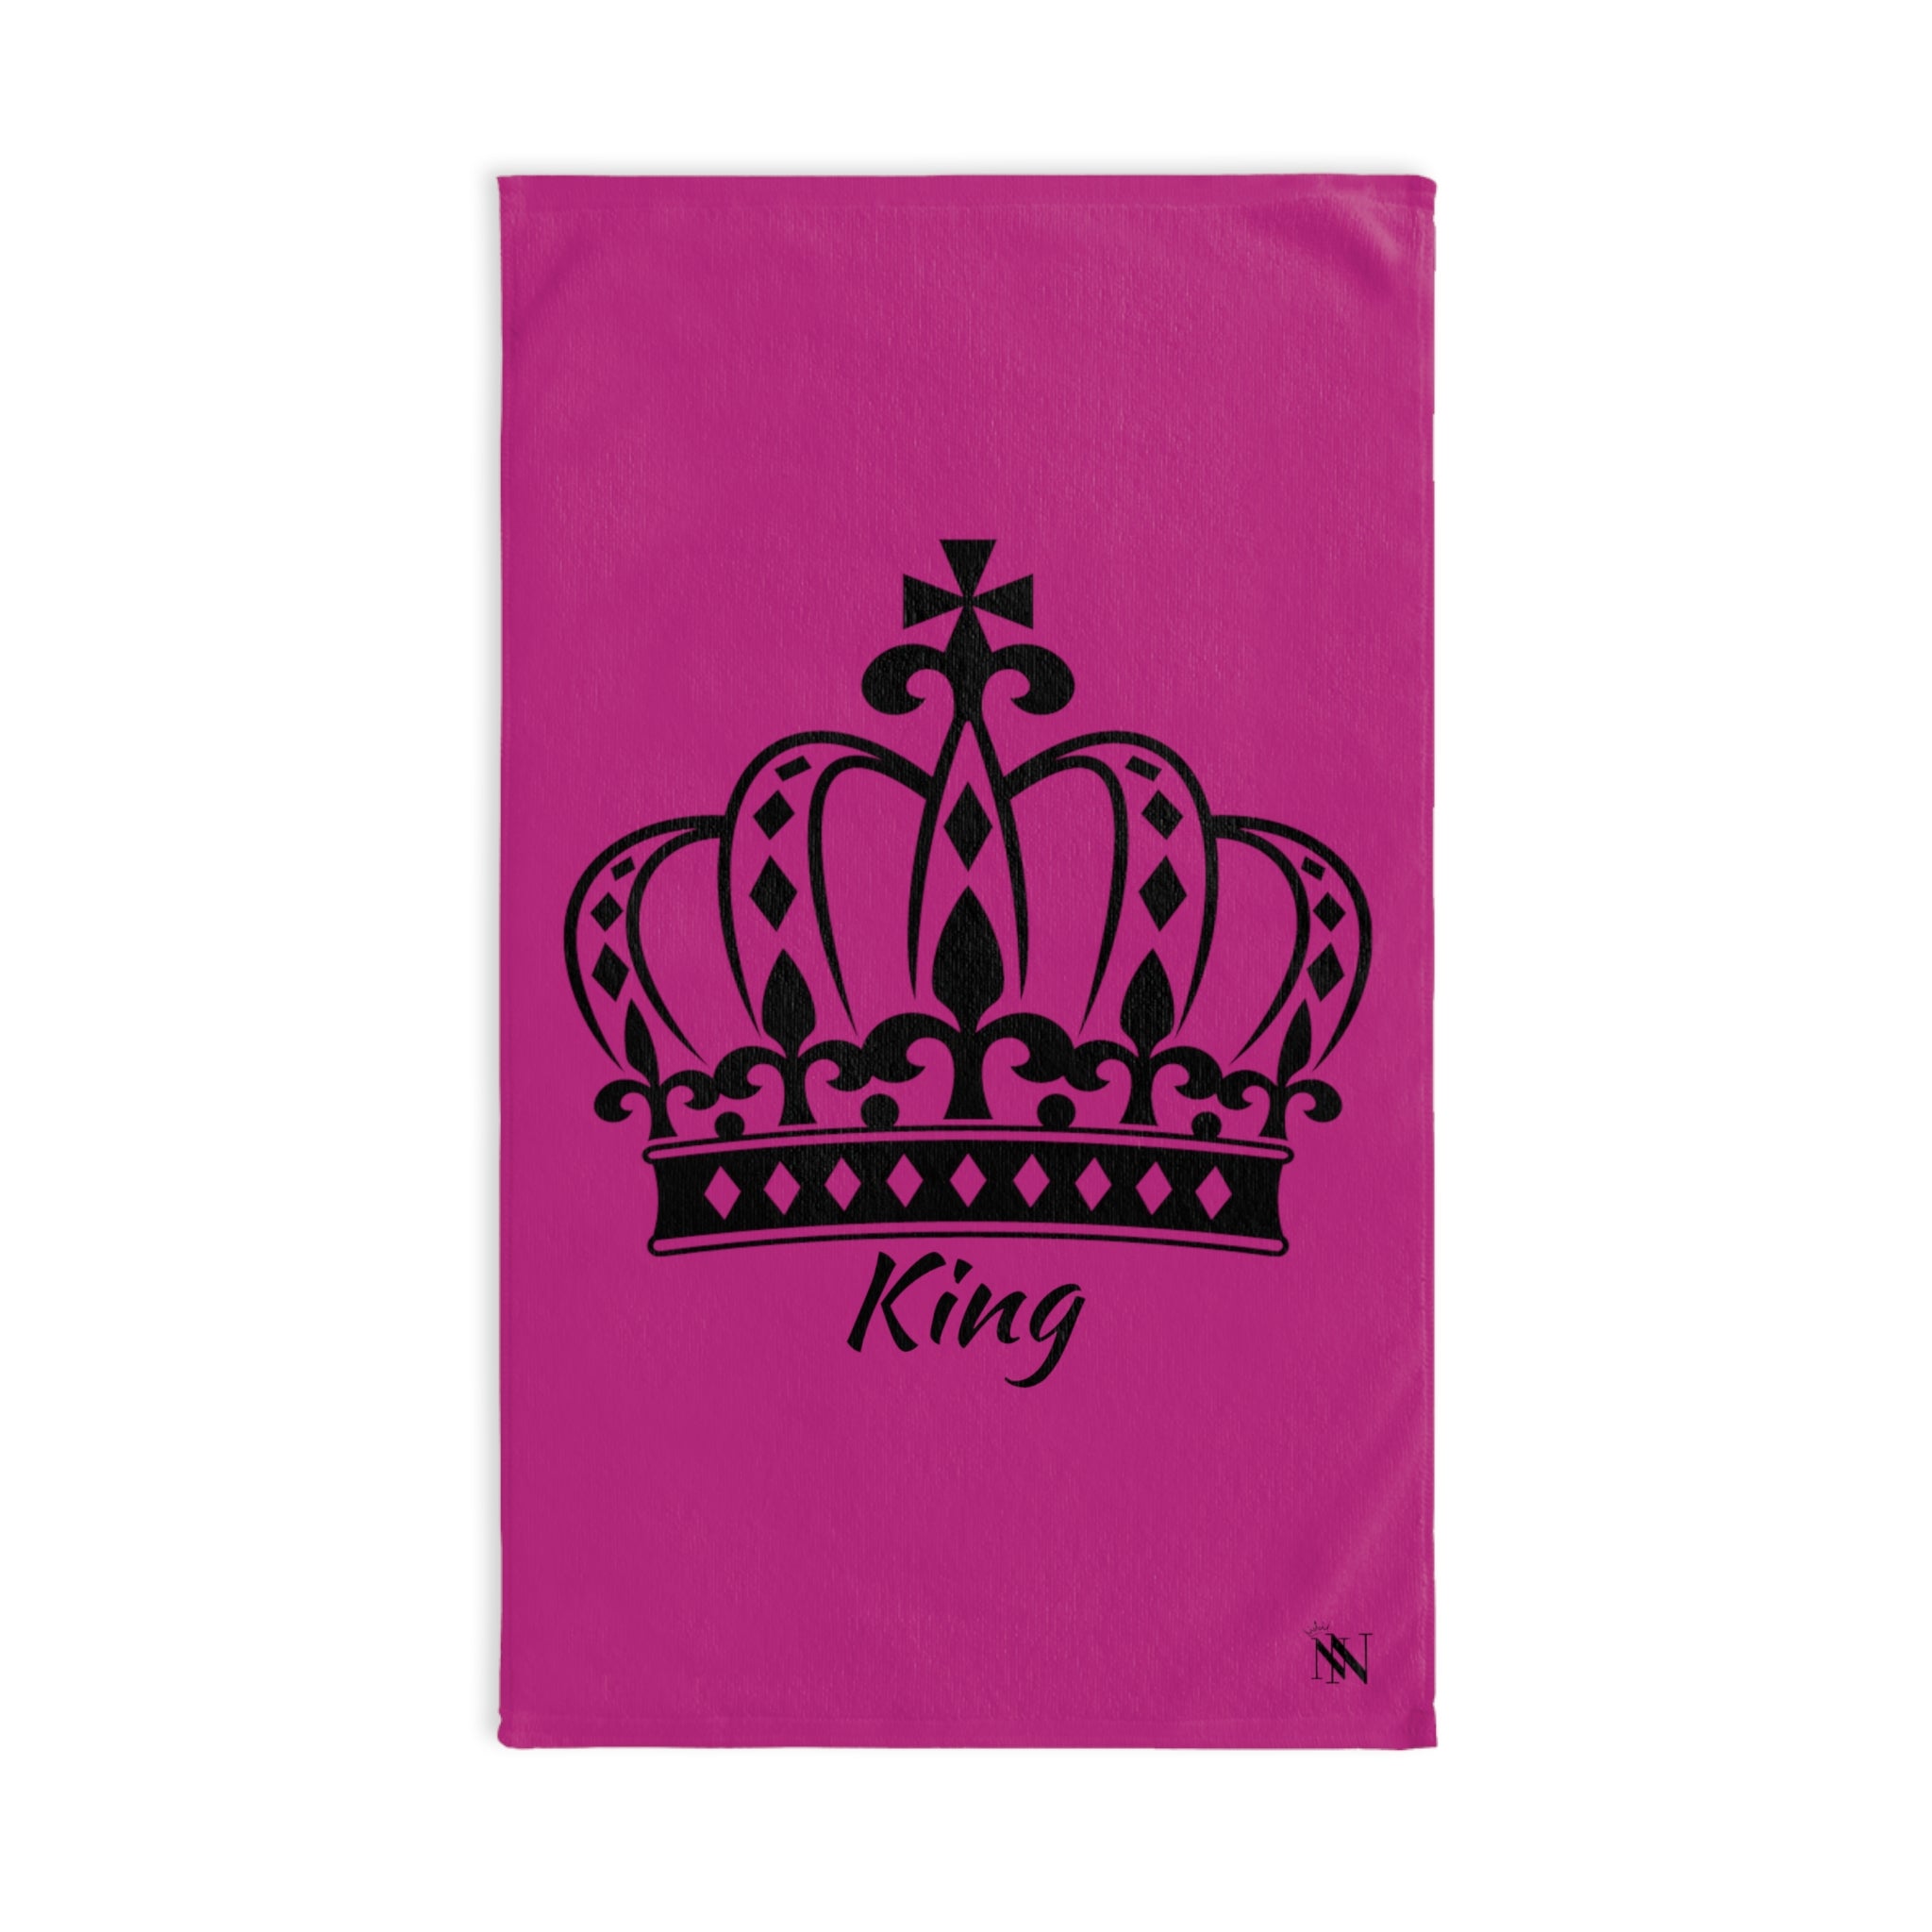 King Crown PrinceFuscia | Funny Gifts for Men - Gifts for Him - Birthday Gifts for Men, Him, Husband, Boyfriend, New Couple Gifts, Fathers & Valentines Day Gifts, Hand Towels NECTAR NAPKINS